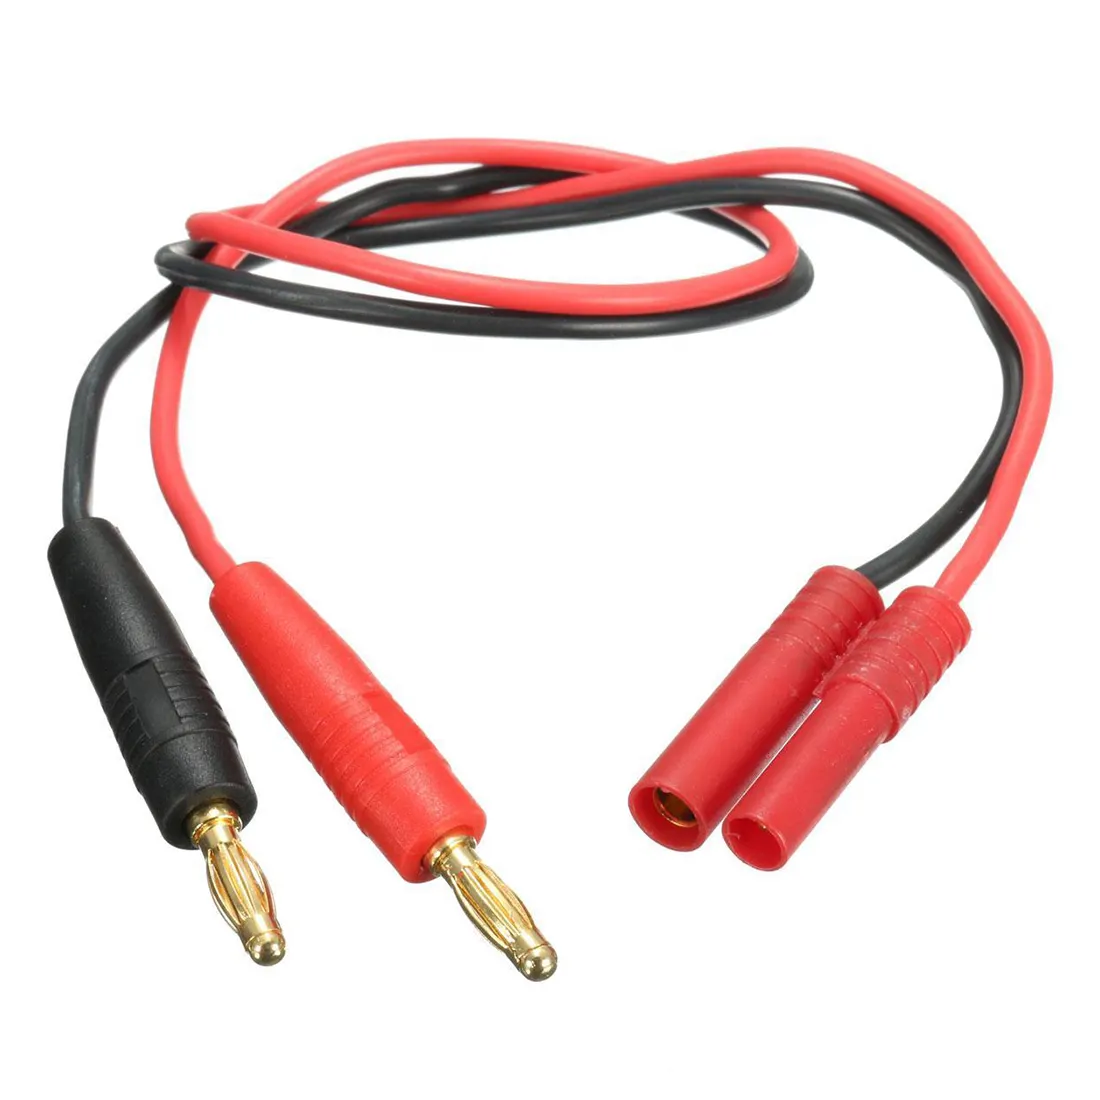 HXT 4.0mm Bullet Connector to 4.0mm Gold Male Banana Plugs Charging Cable